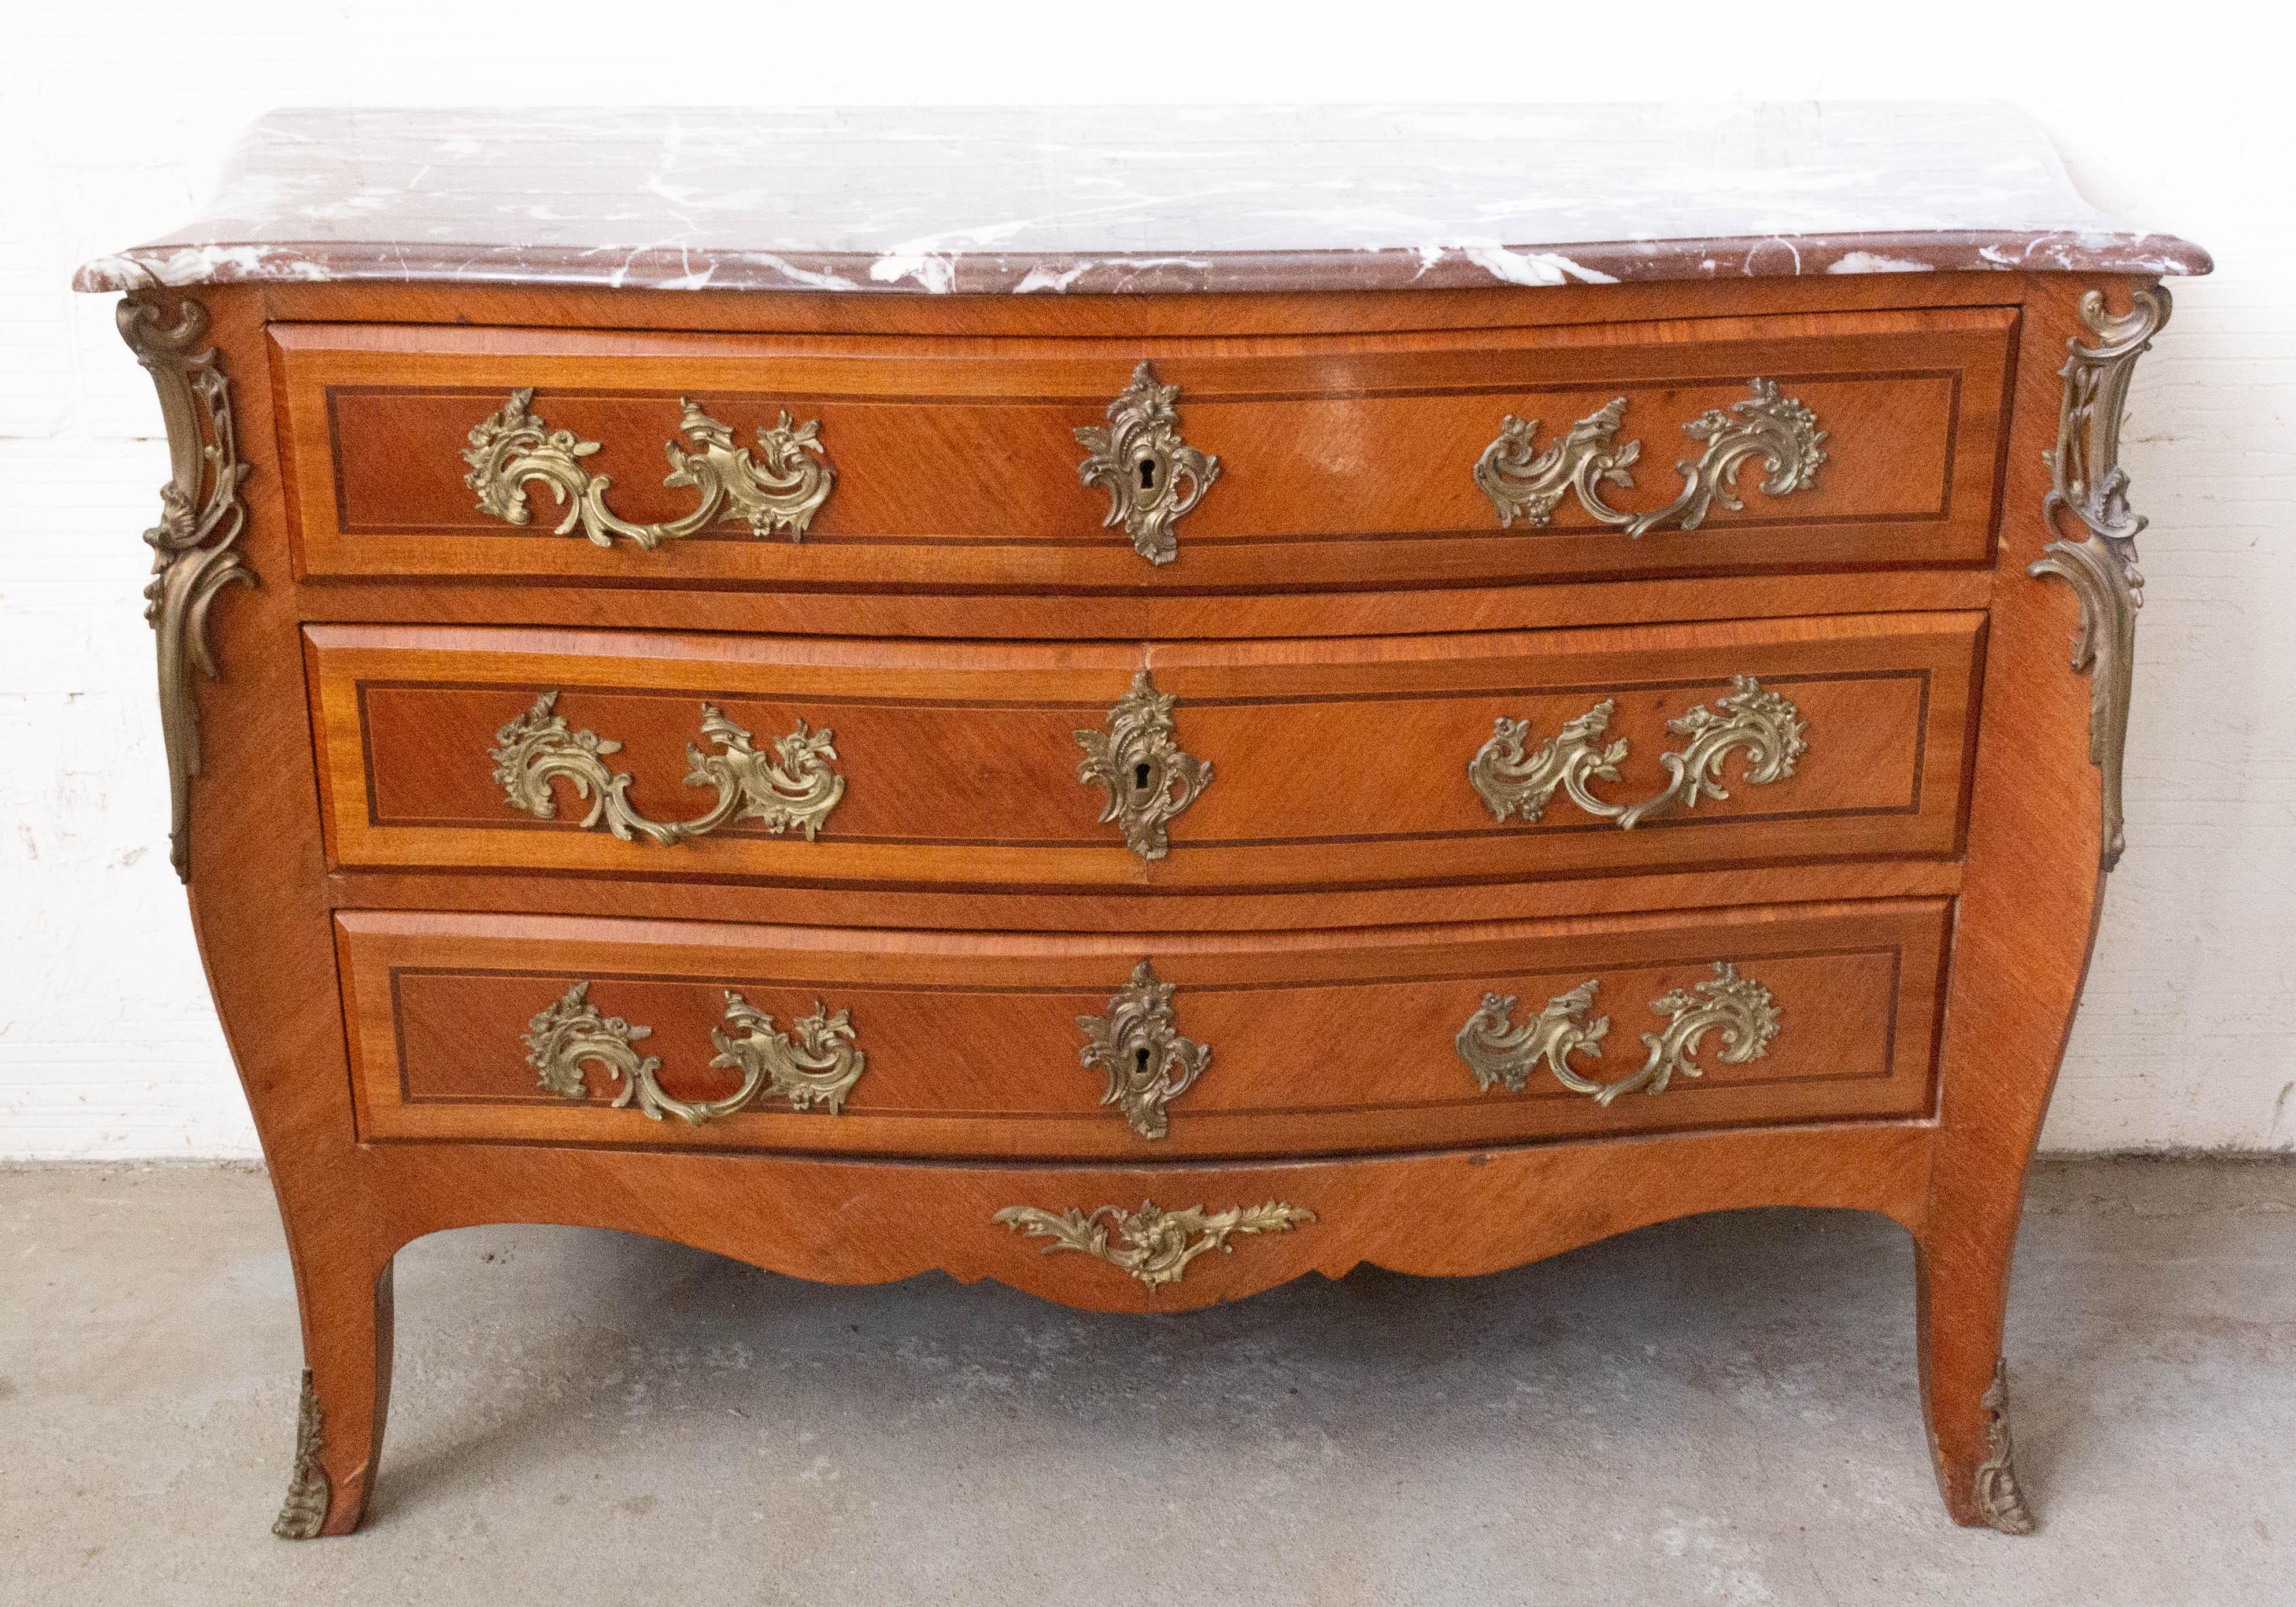 Commode French chest of drawers late 19th century classical style marble top, circa 1890
Exotic woods and bronze
Good antique condition

Shipping:
55/129/87 cm 89 kg.